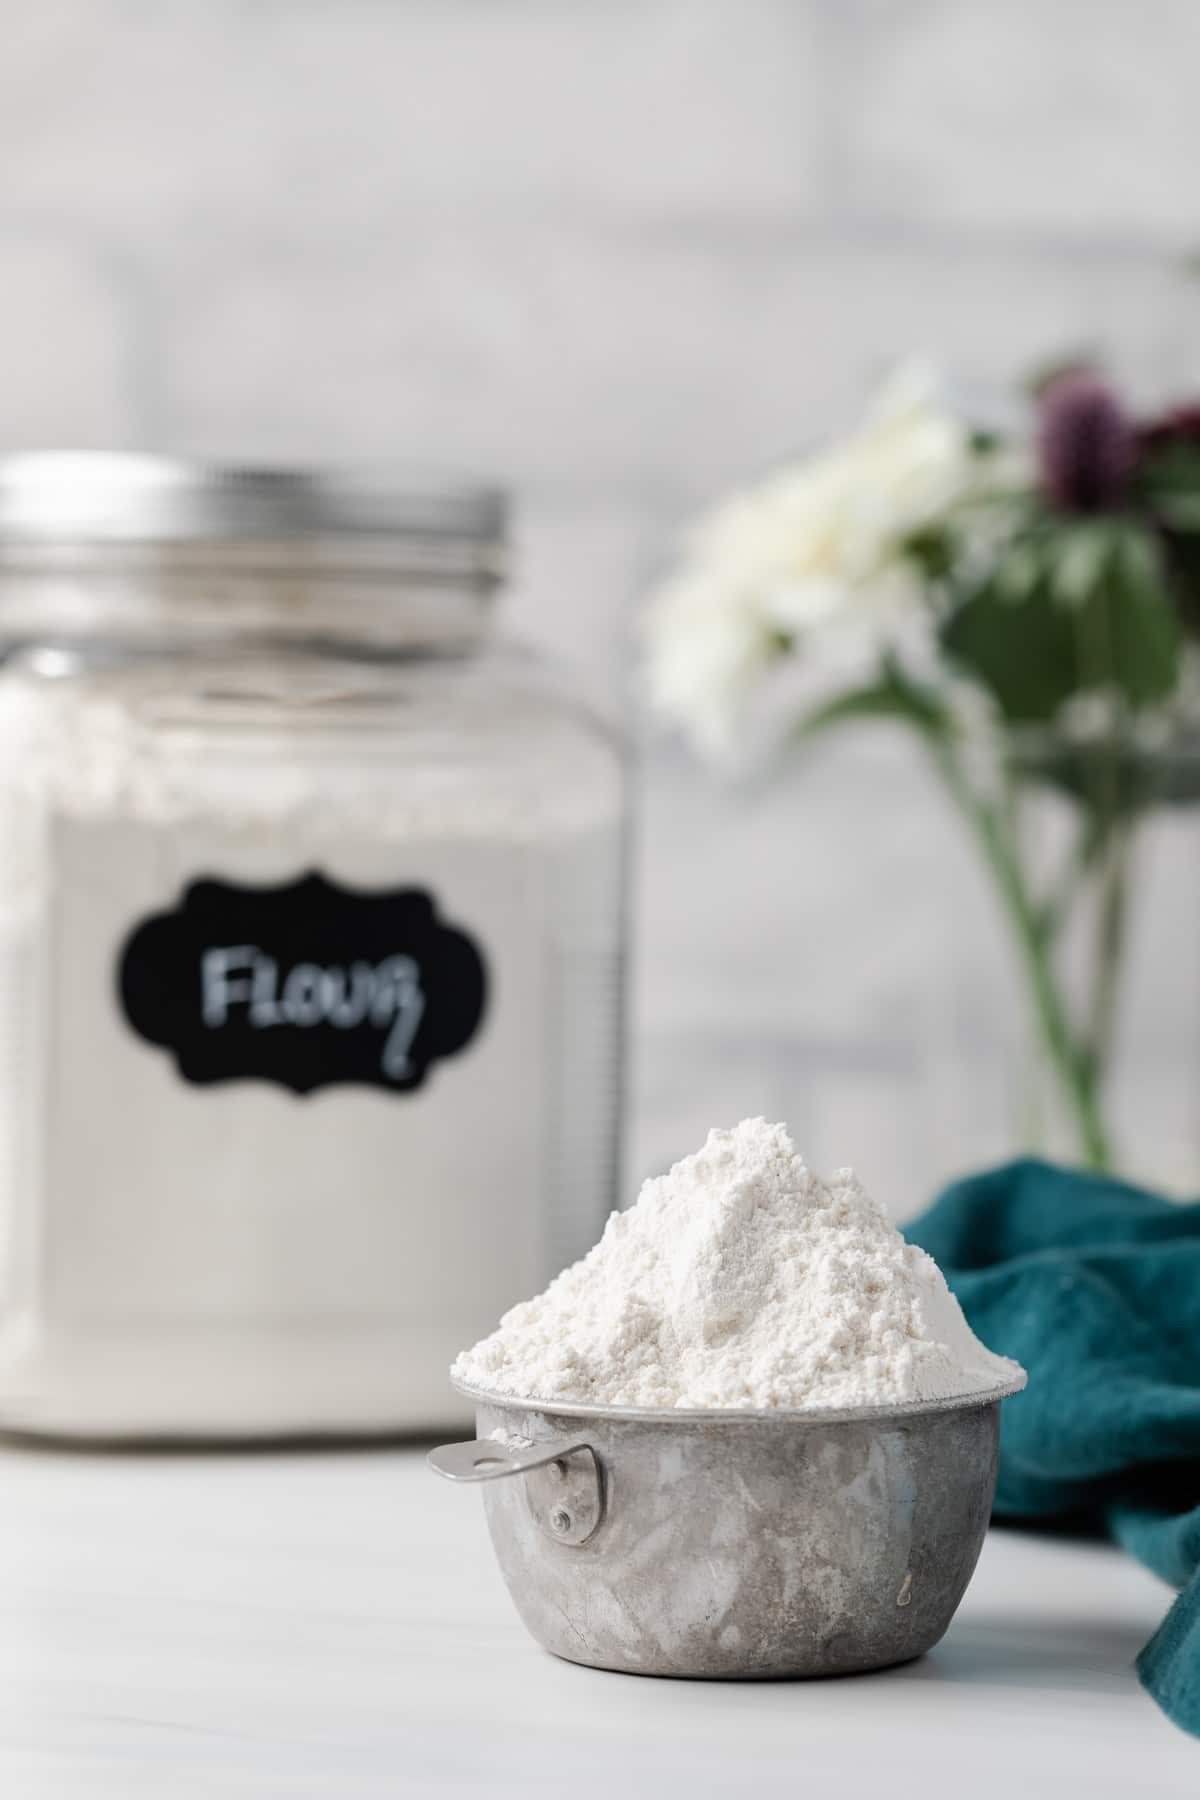 flour piled high in old measuring cup with jar of flour and vase of flowers in background